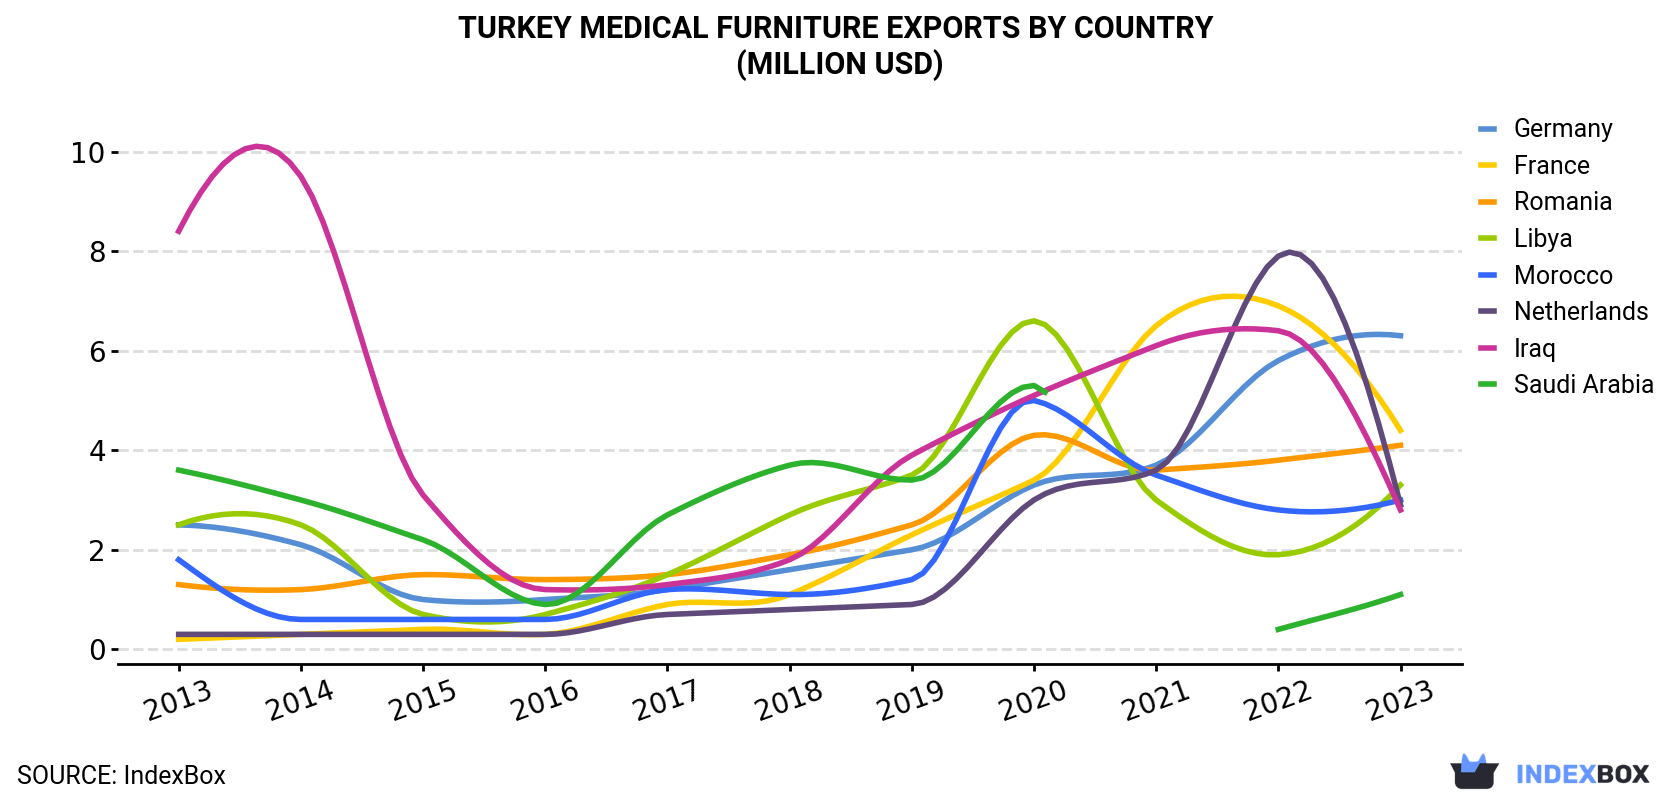 Turkey Medical Furniture Exports By Country (Million USD)